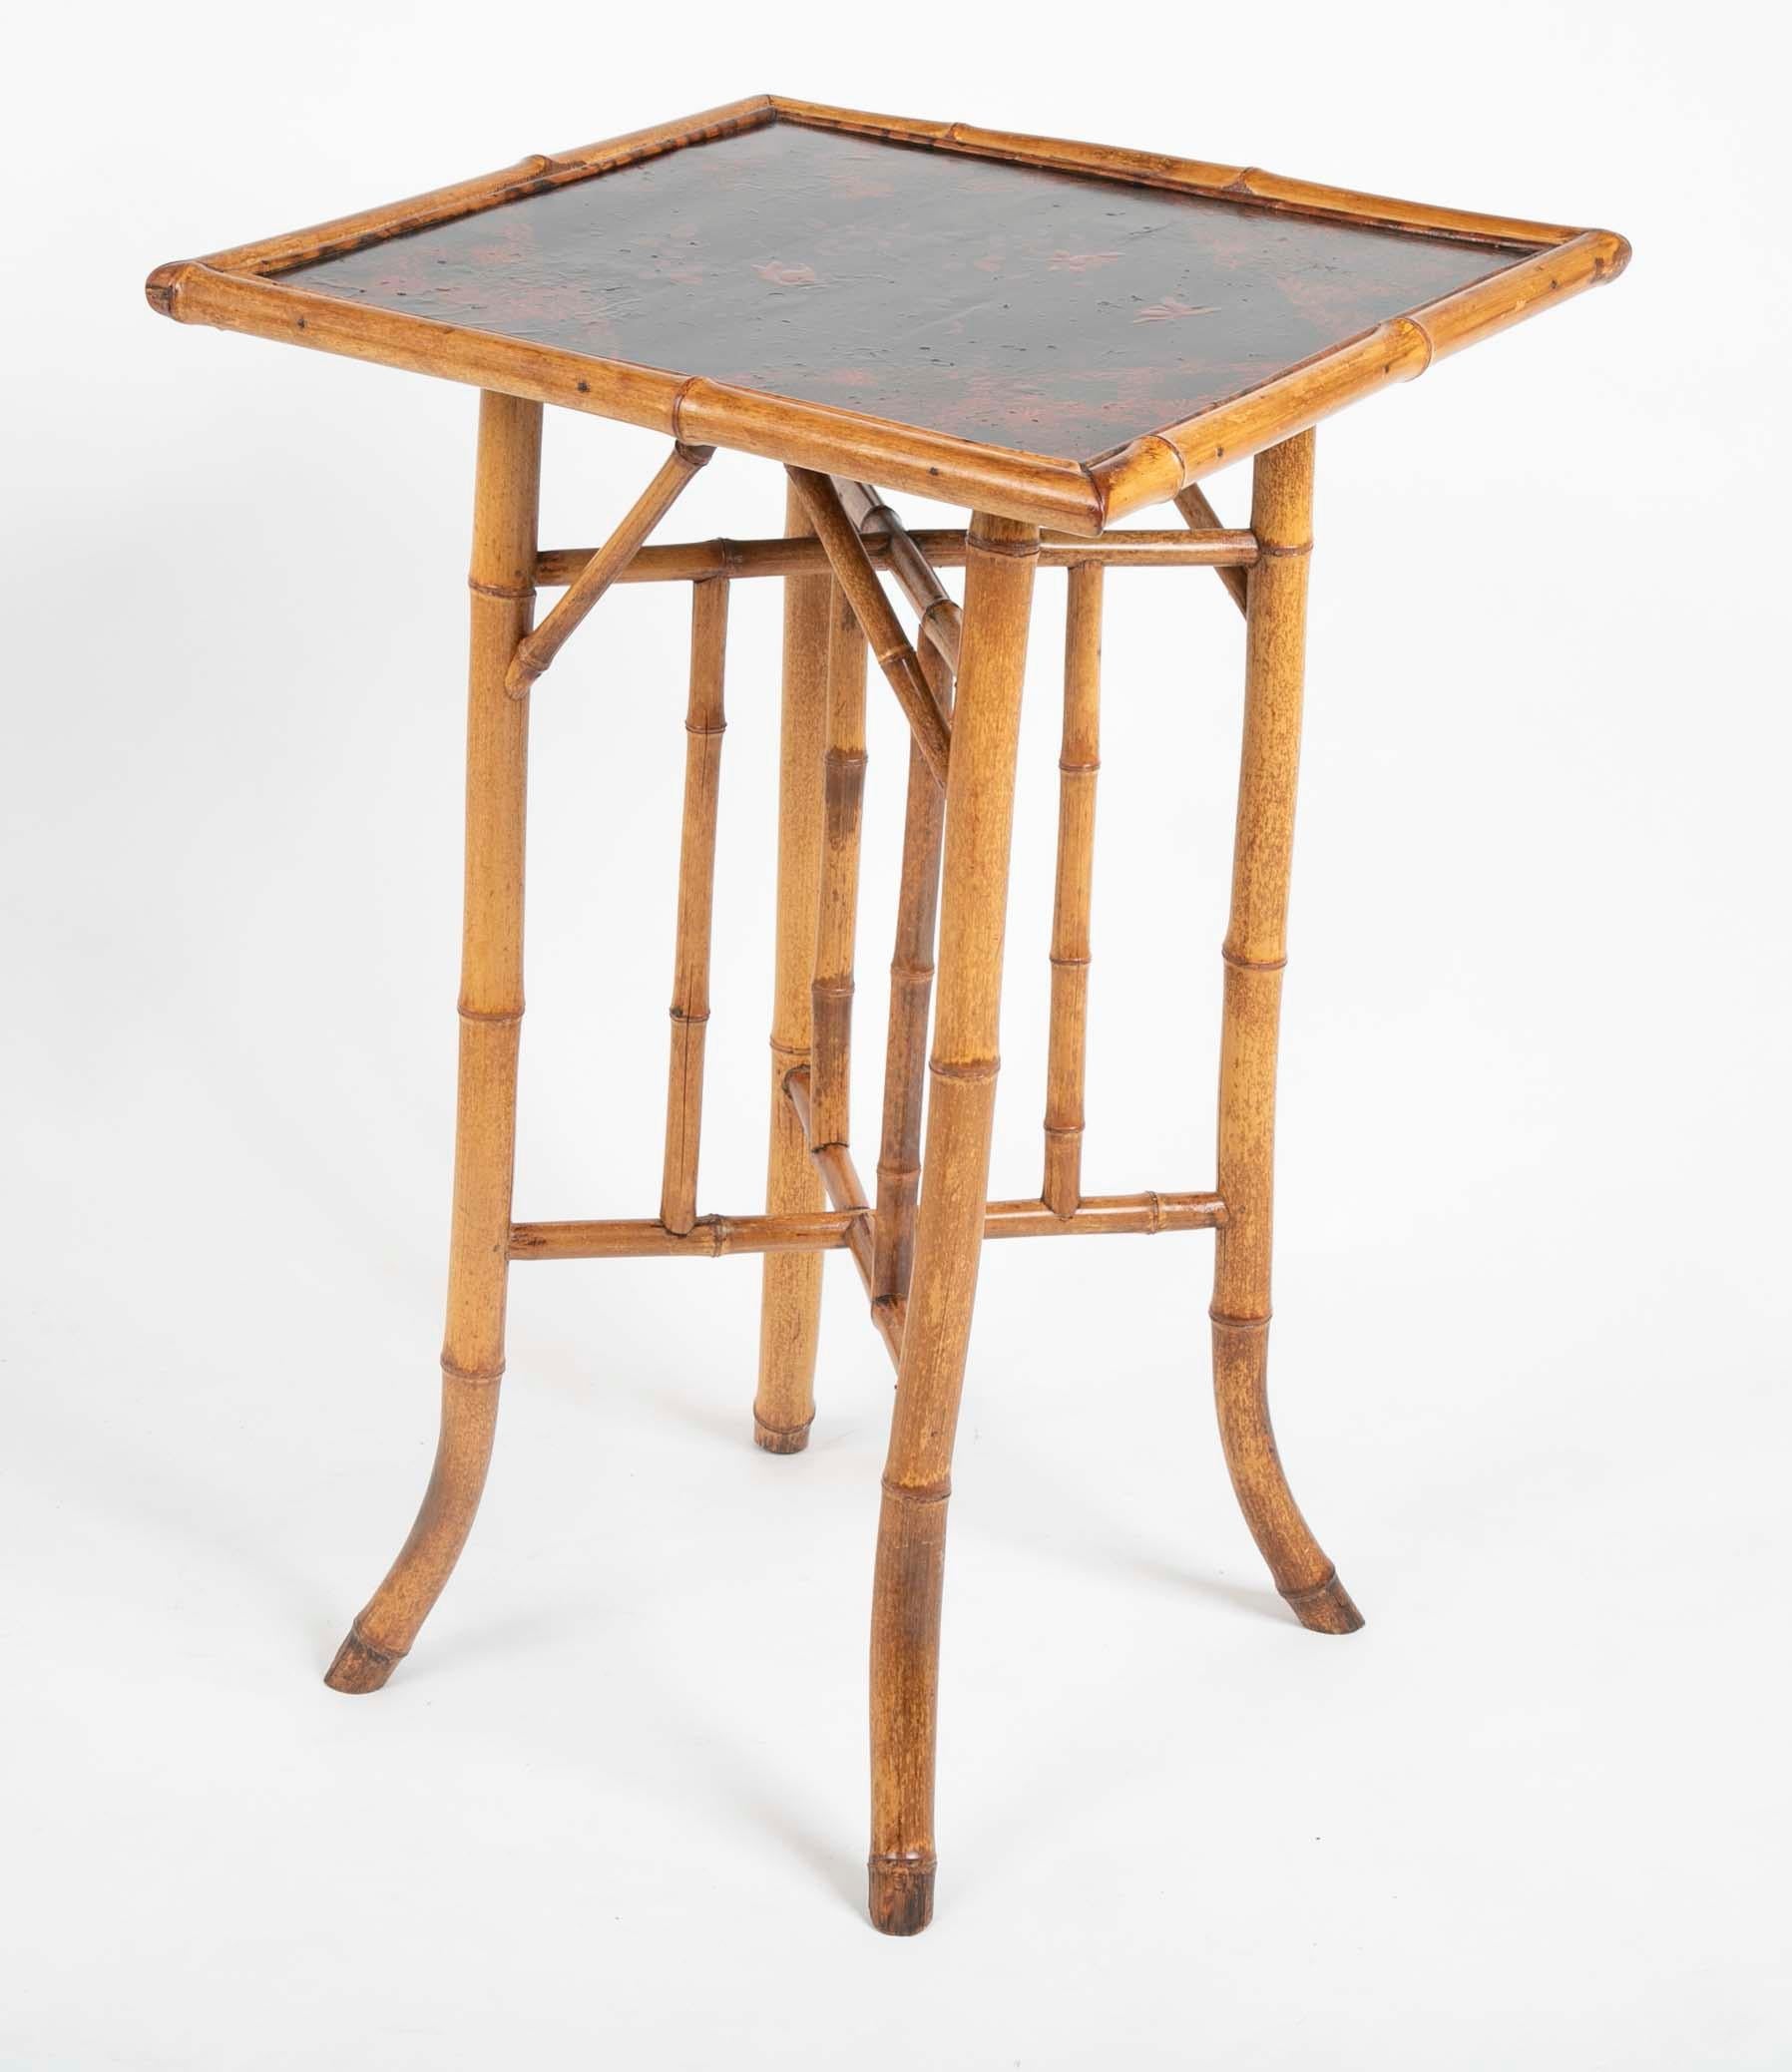 A bamboo and lacquer chinoiserie table made in France.